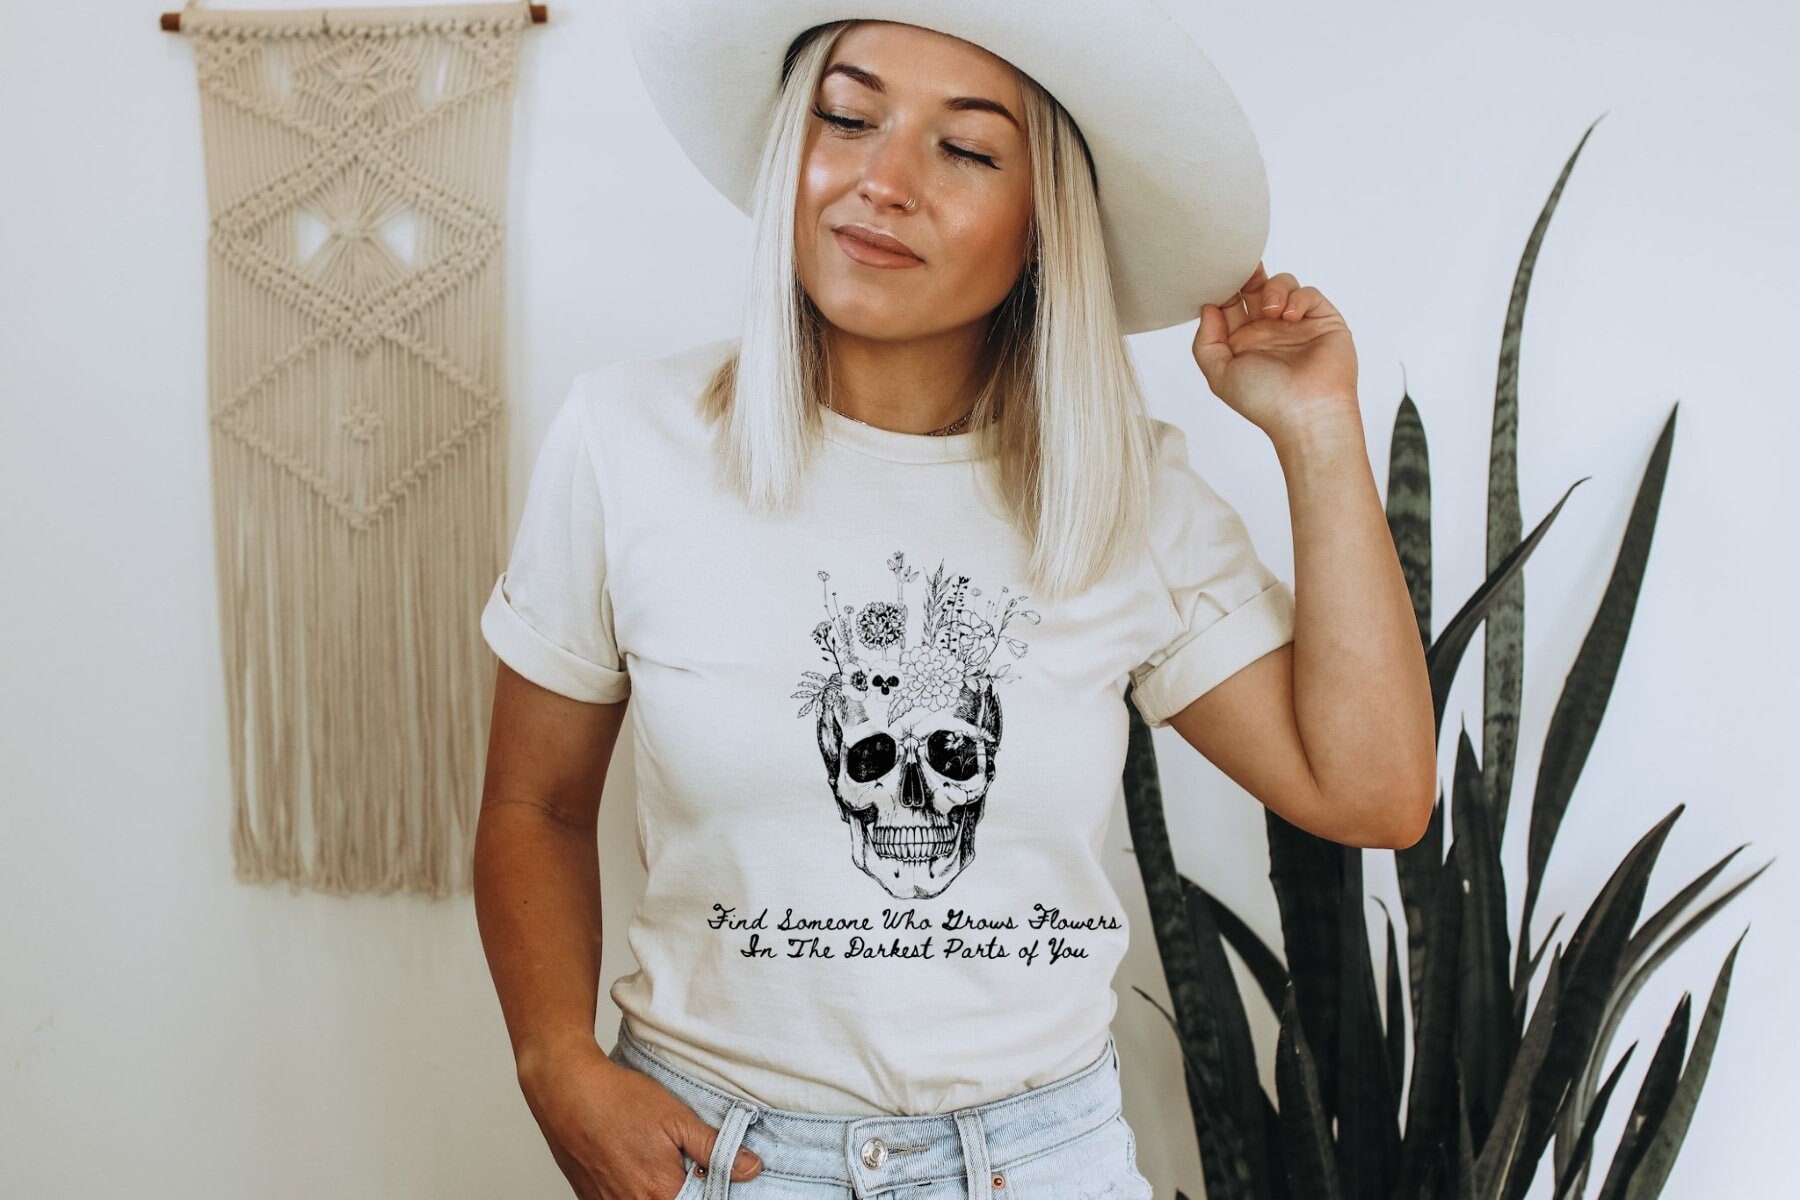 zach bryan shirt find someone who grows flowers in the darkest parts of you 5326 dddqd